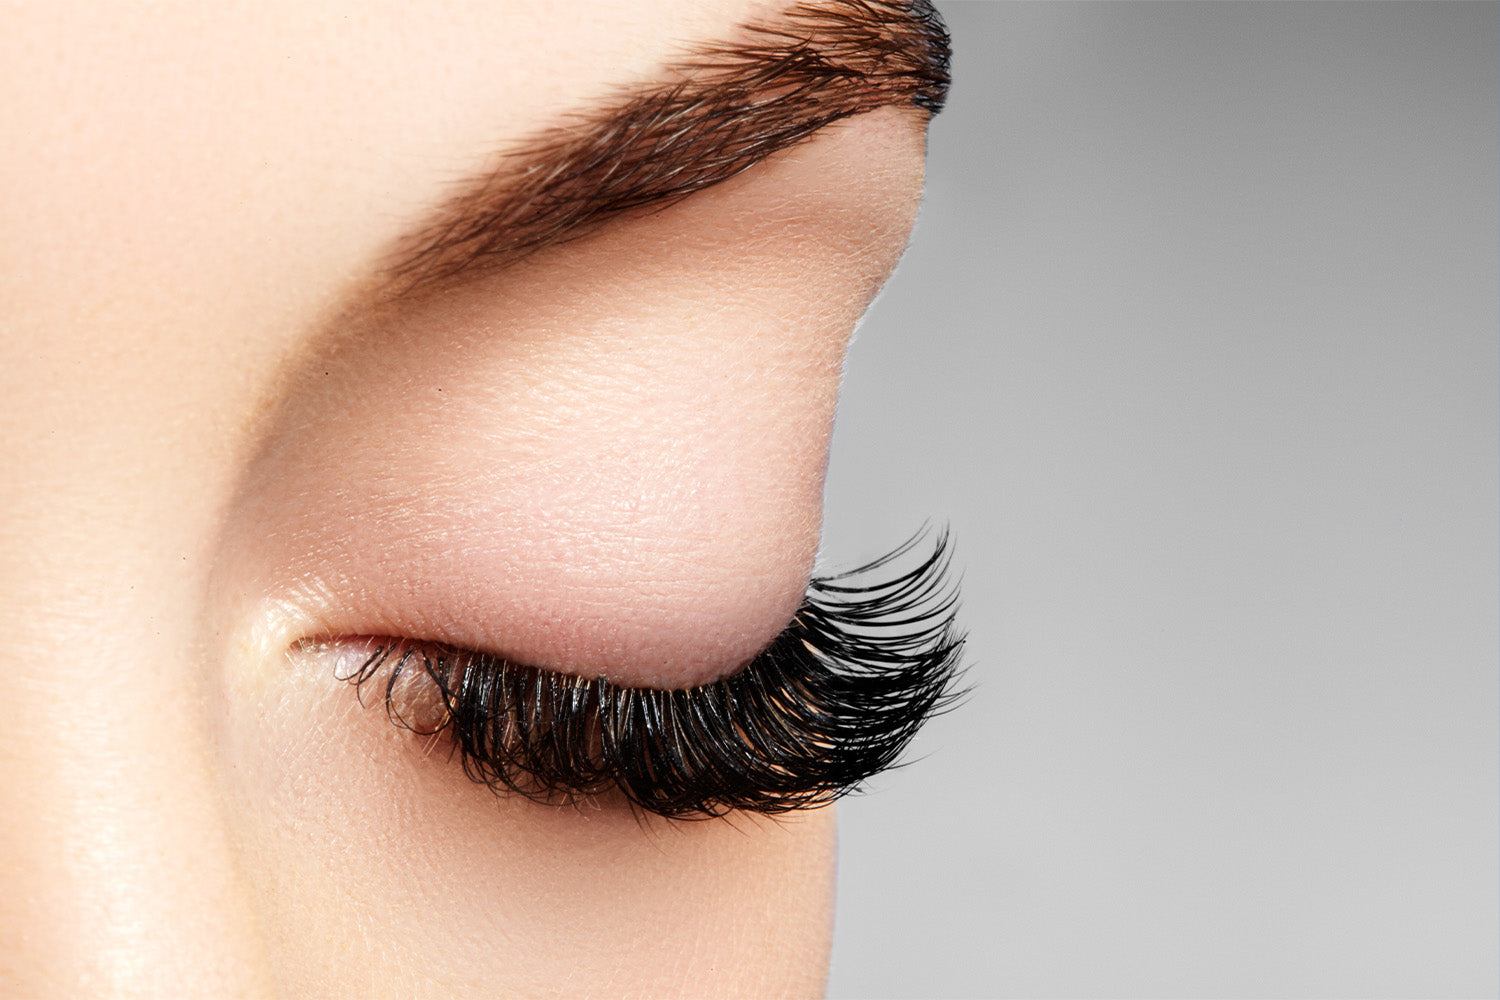 How To Make Your Lash Extensions Last Longer: 7 Tips From the Lash Experts